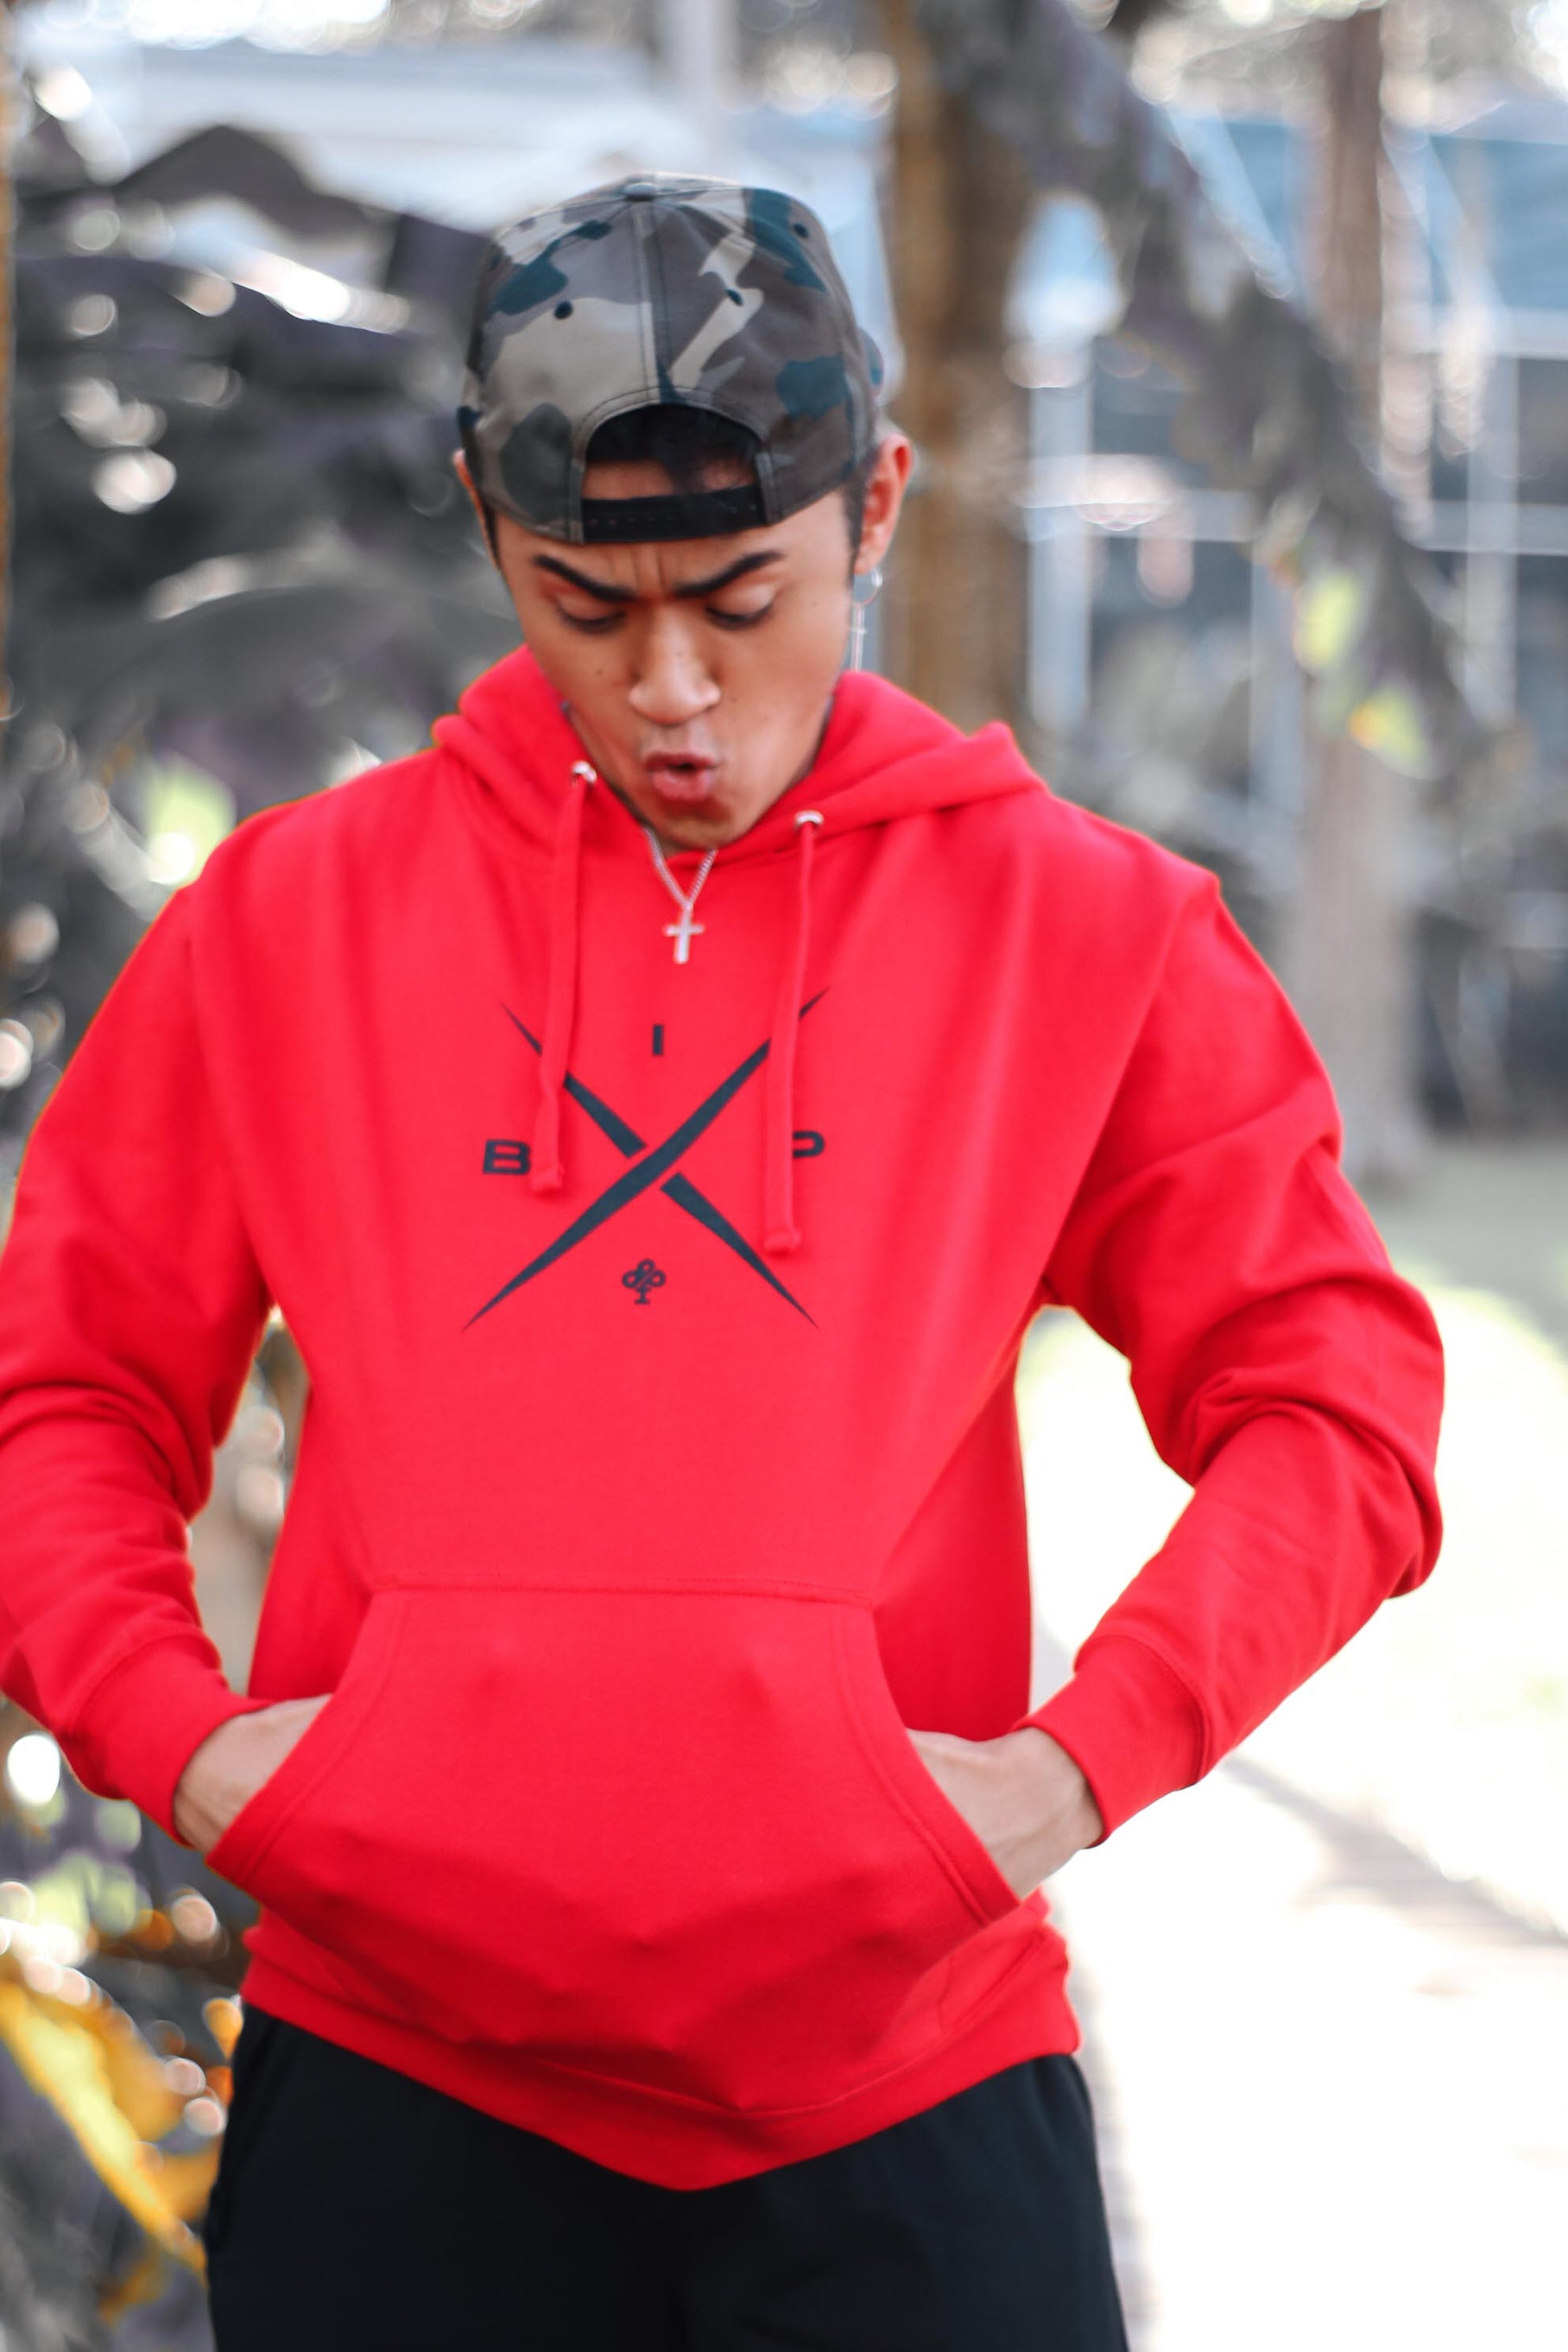 X Logo 2.0  om a red  Premium dry fit hoodie by Ireland Boys productions viral youtube channel featuring Ricky Ireland